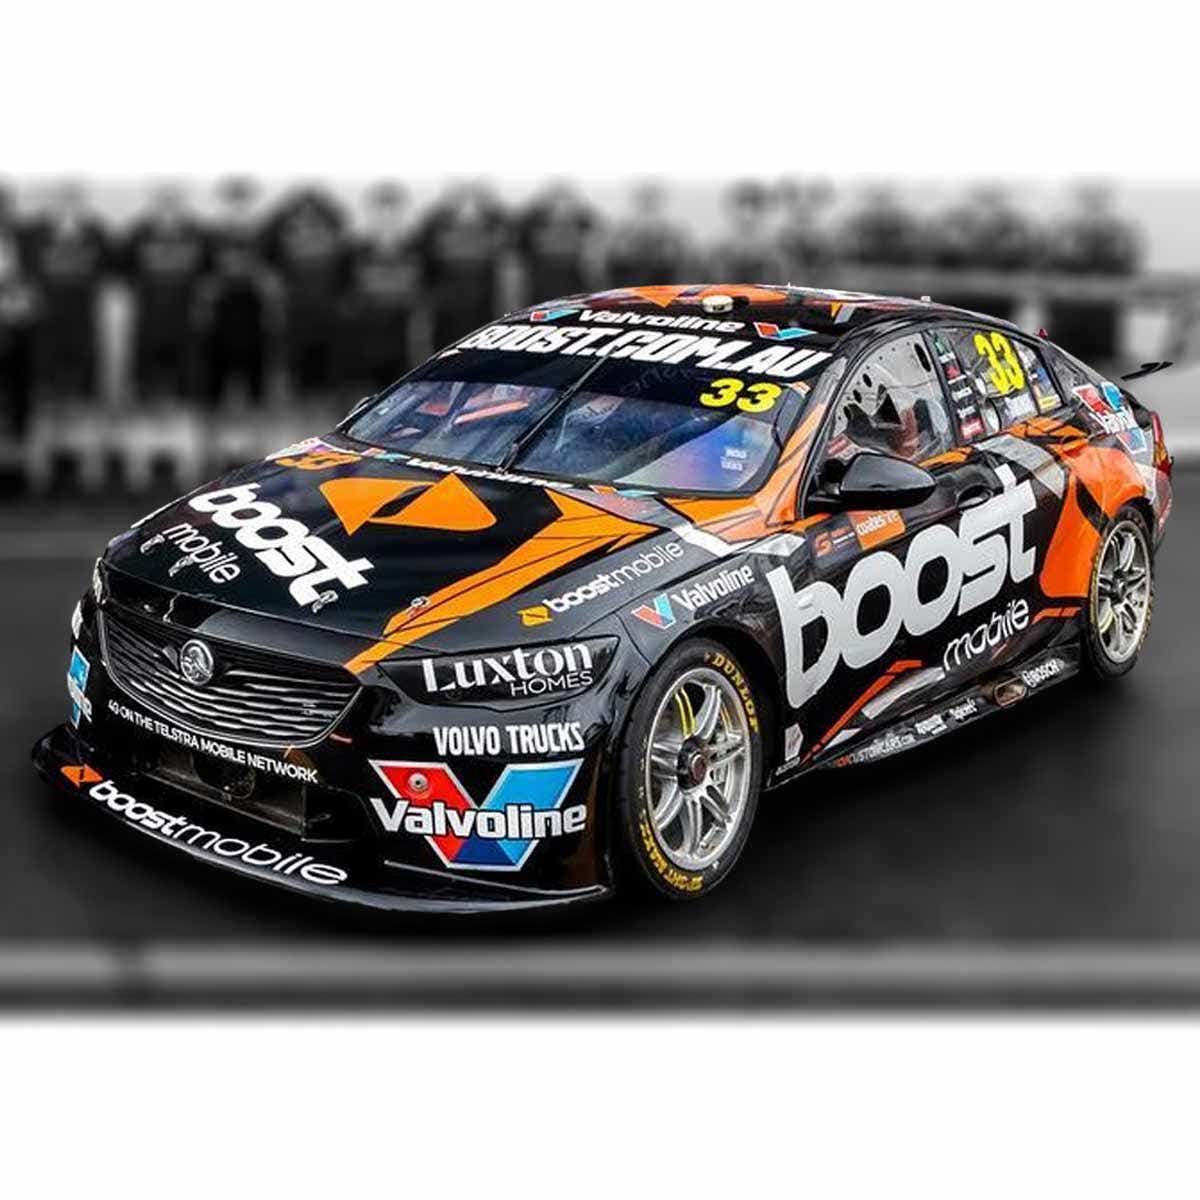 Holden ZB Commodore #33 Driver: Richie Stanaway